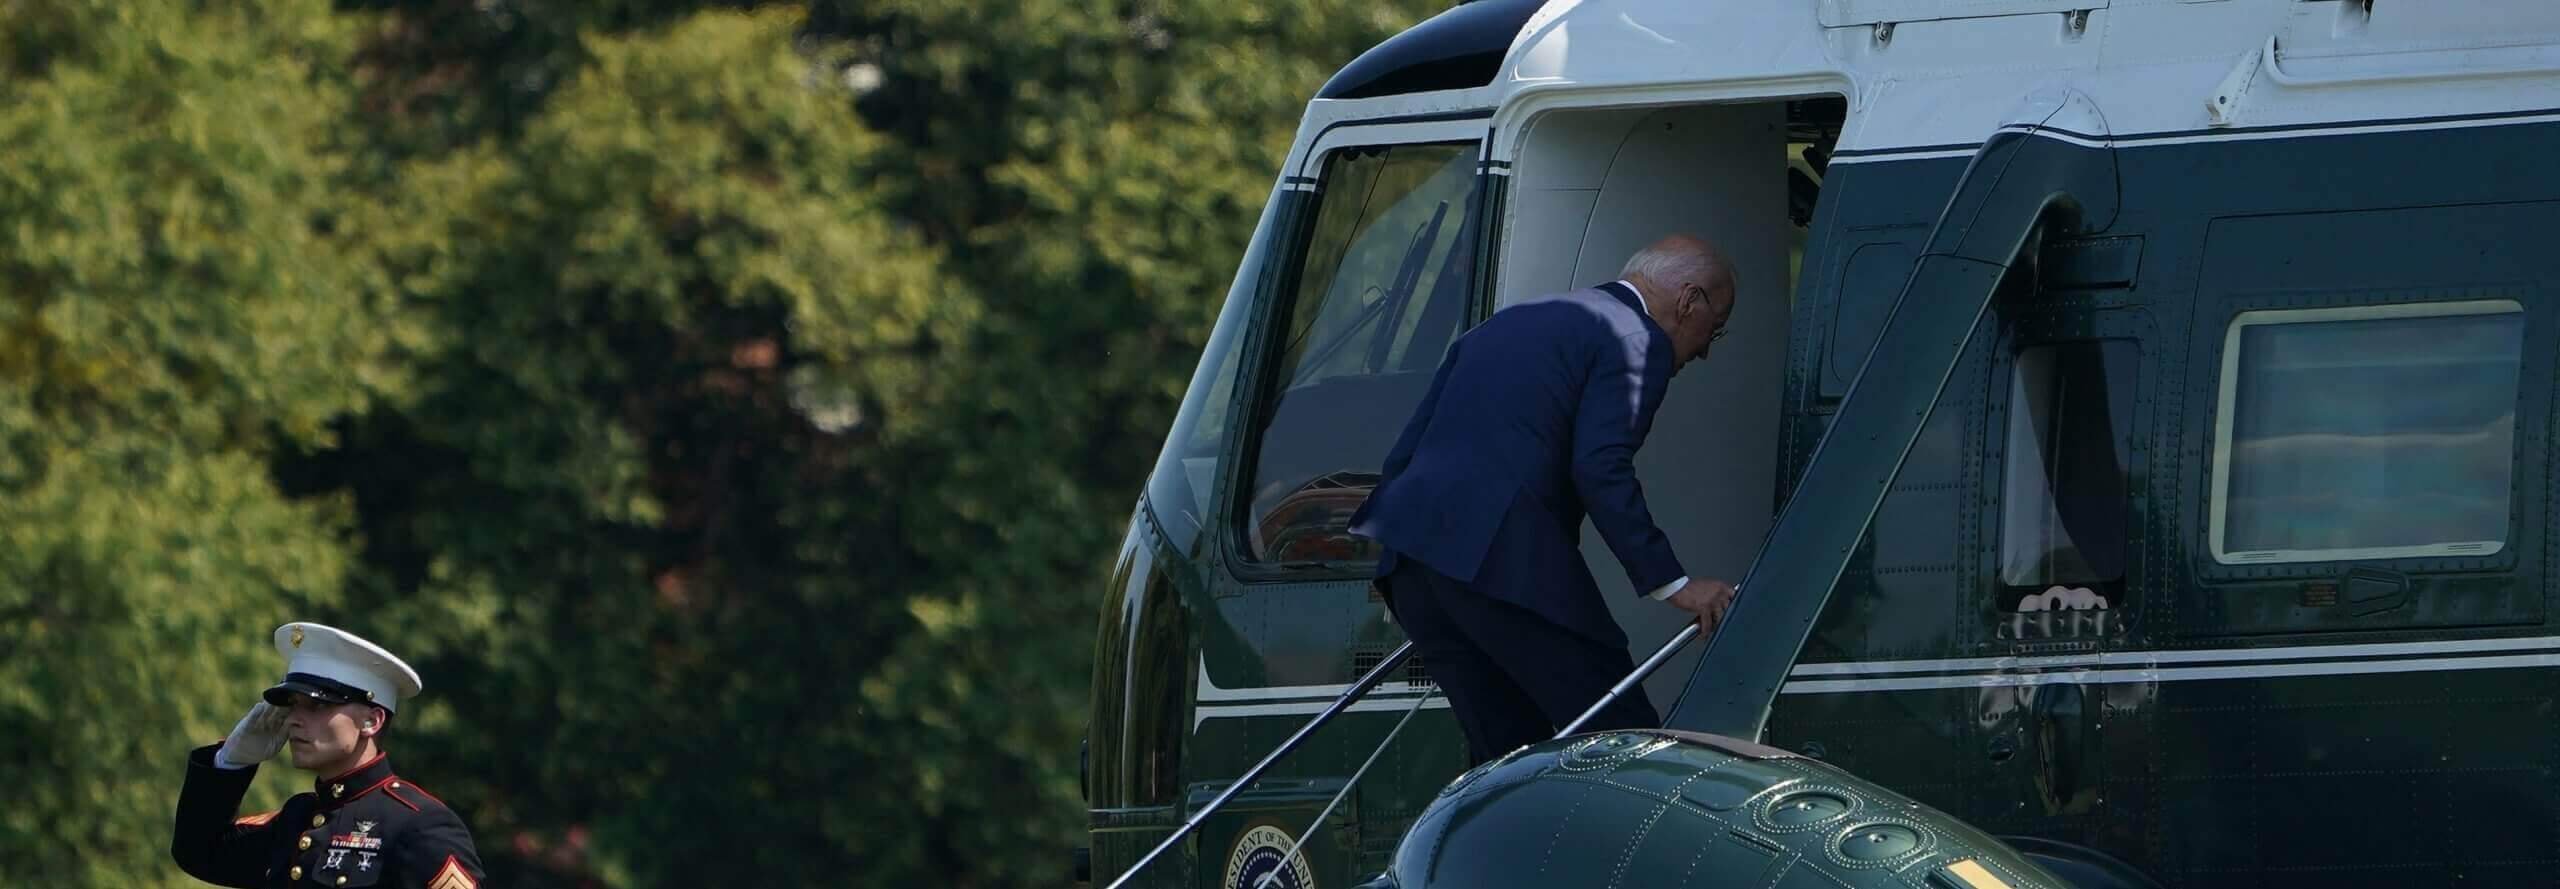 Secret Service Claims to Have ‘No Records’ of Who Visits Biden in Delaware › American Greatness